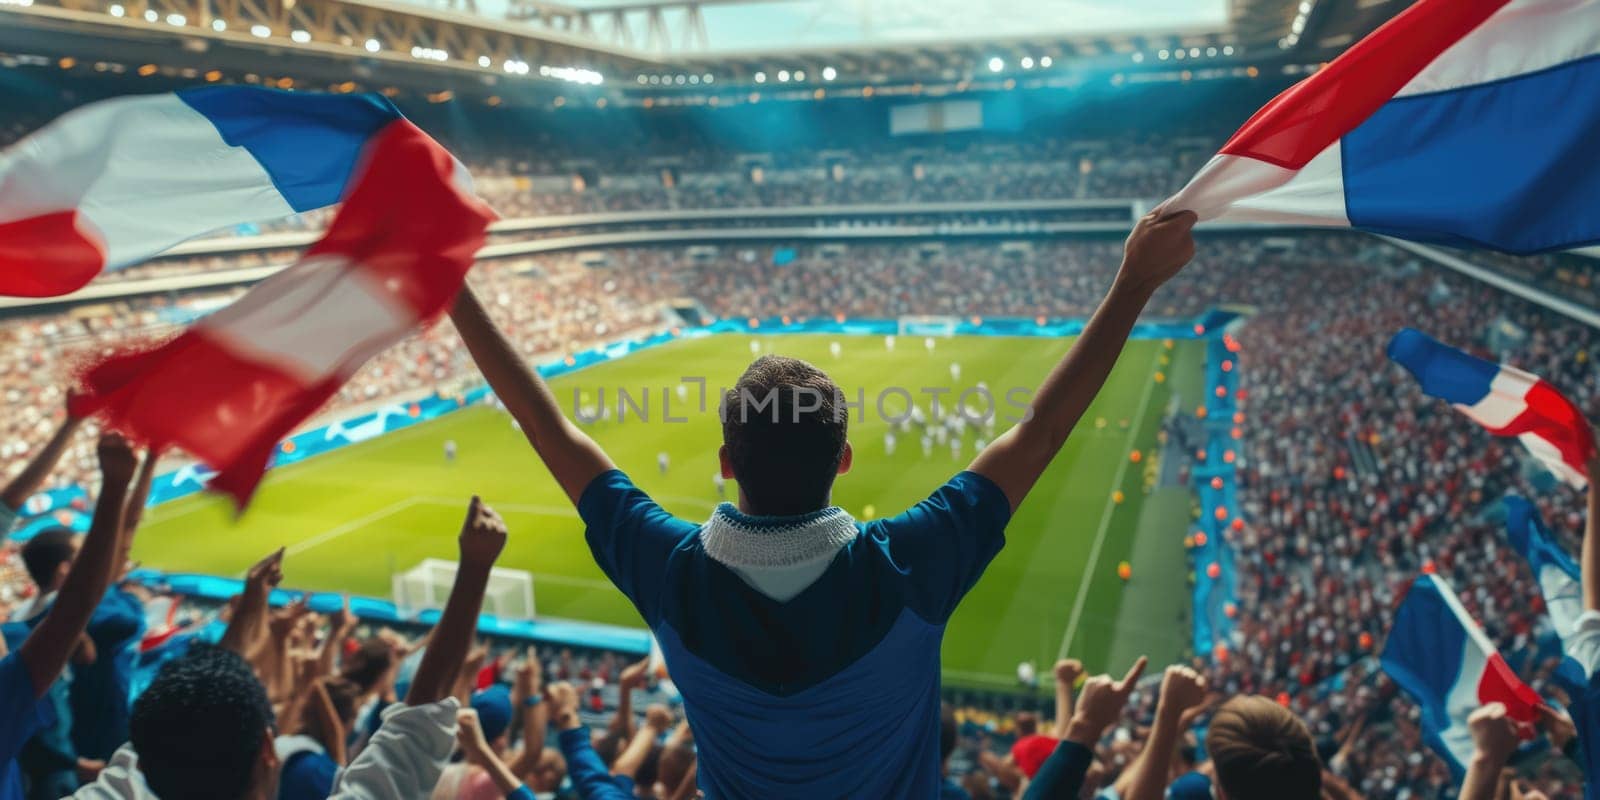 Fans excitedly gesture at thrilling football match in stadium AIG41 by biancoblue